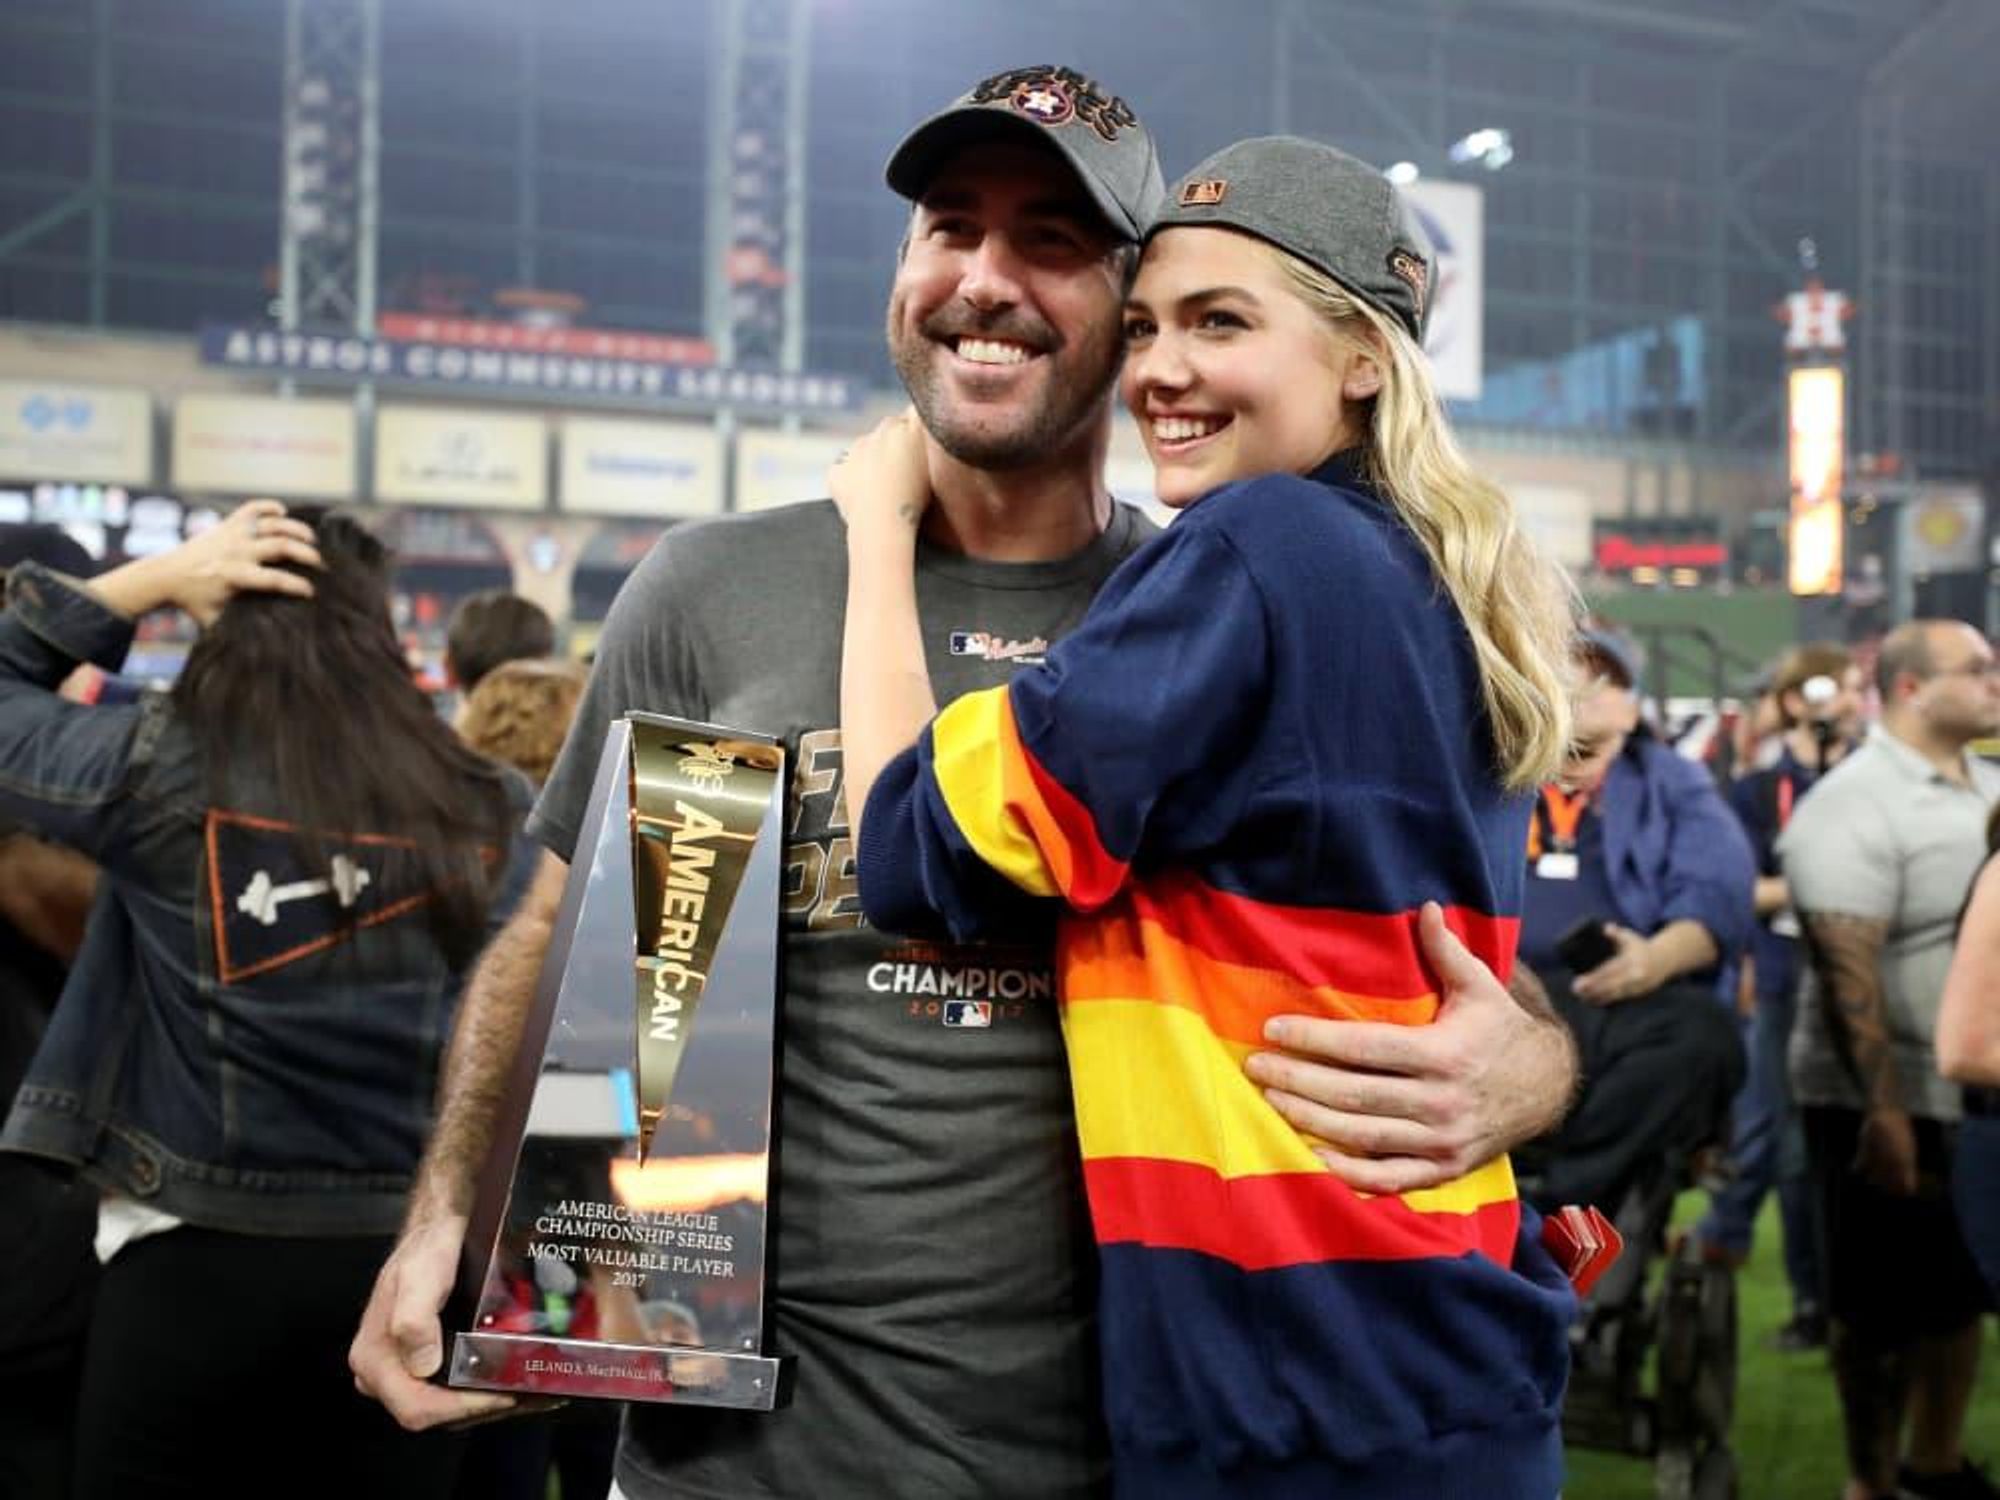 Houston's farewell to Kate Upton and Justin Verlander leads week's top stories